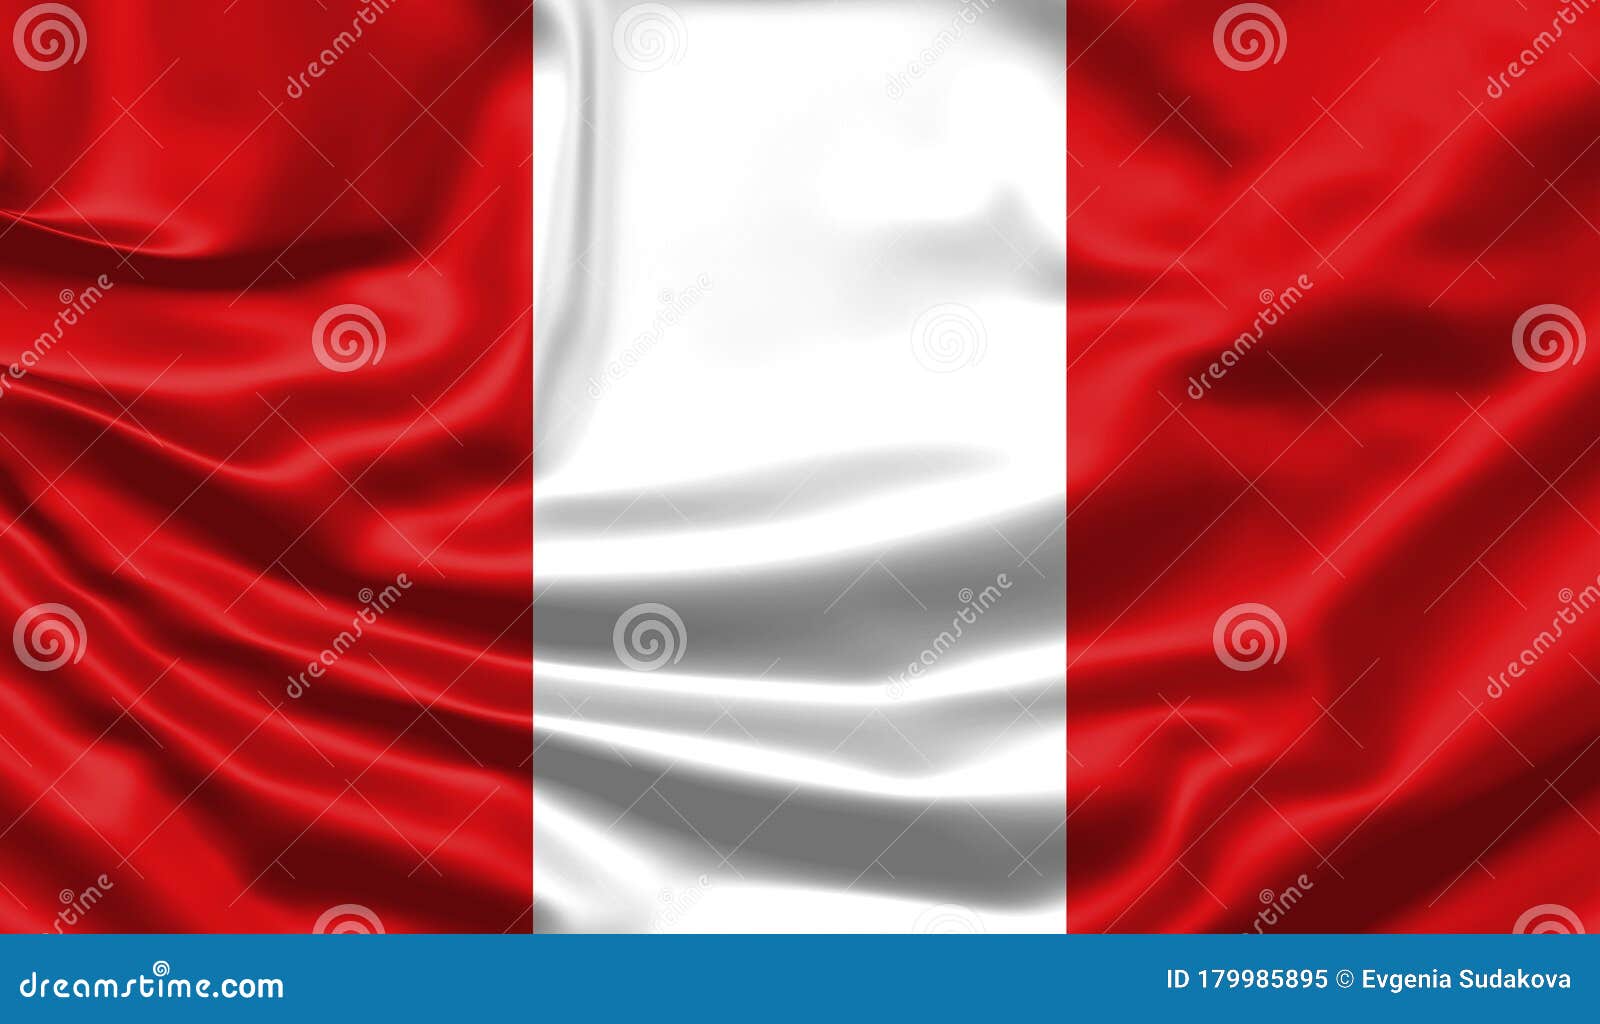 Realistic Flag. Peru Flag Blowing in the Wind. Background Silk Texture ...